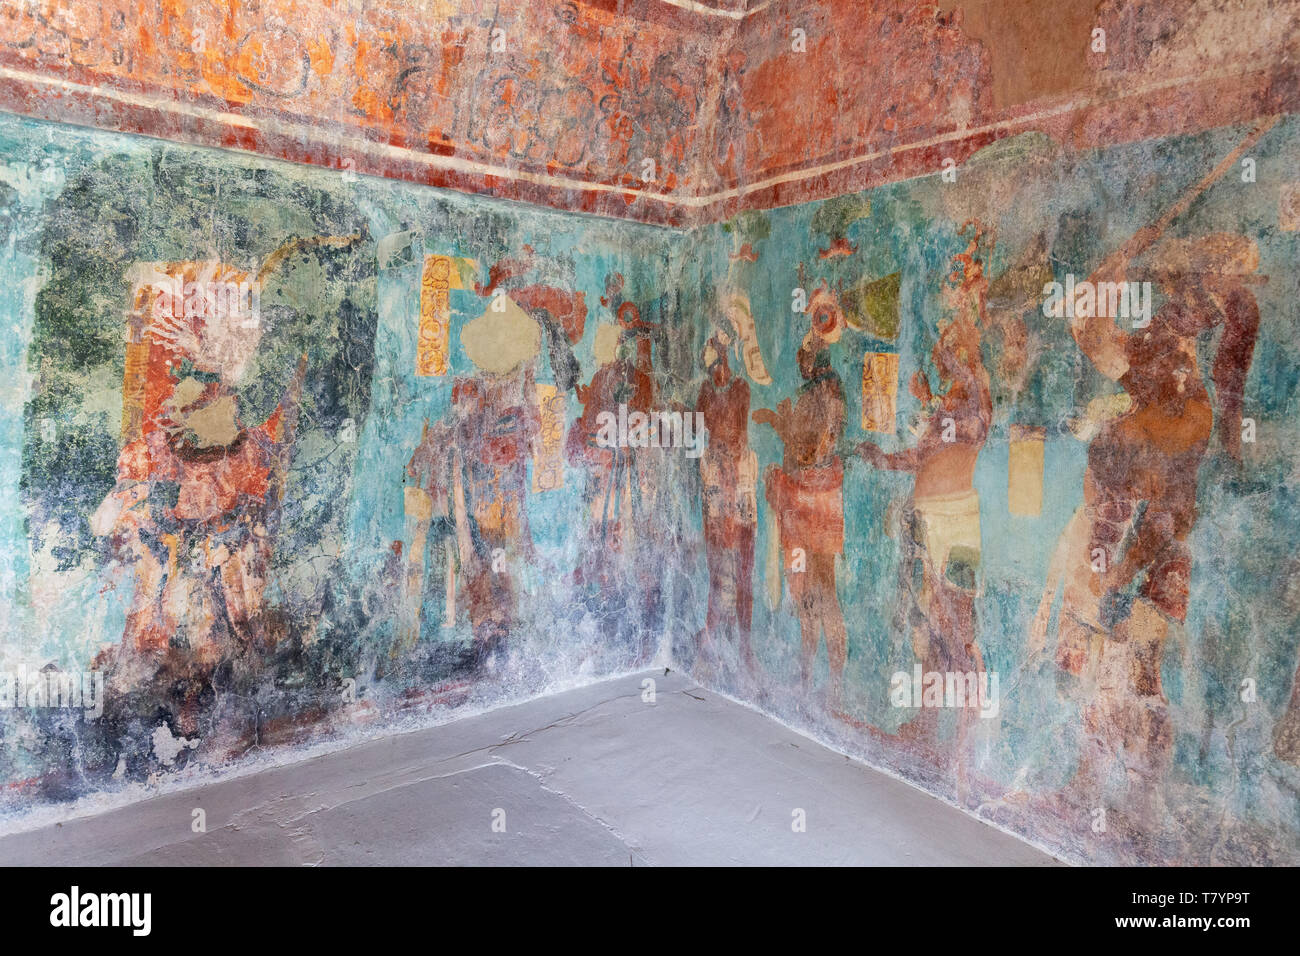 Bonampak murals mayan paintings at Bonampak Mexico. This image of Room1, of the three rooms in the Temple of Murals showing a gathering of dignitaries Stock Photo